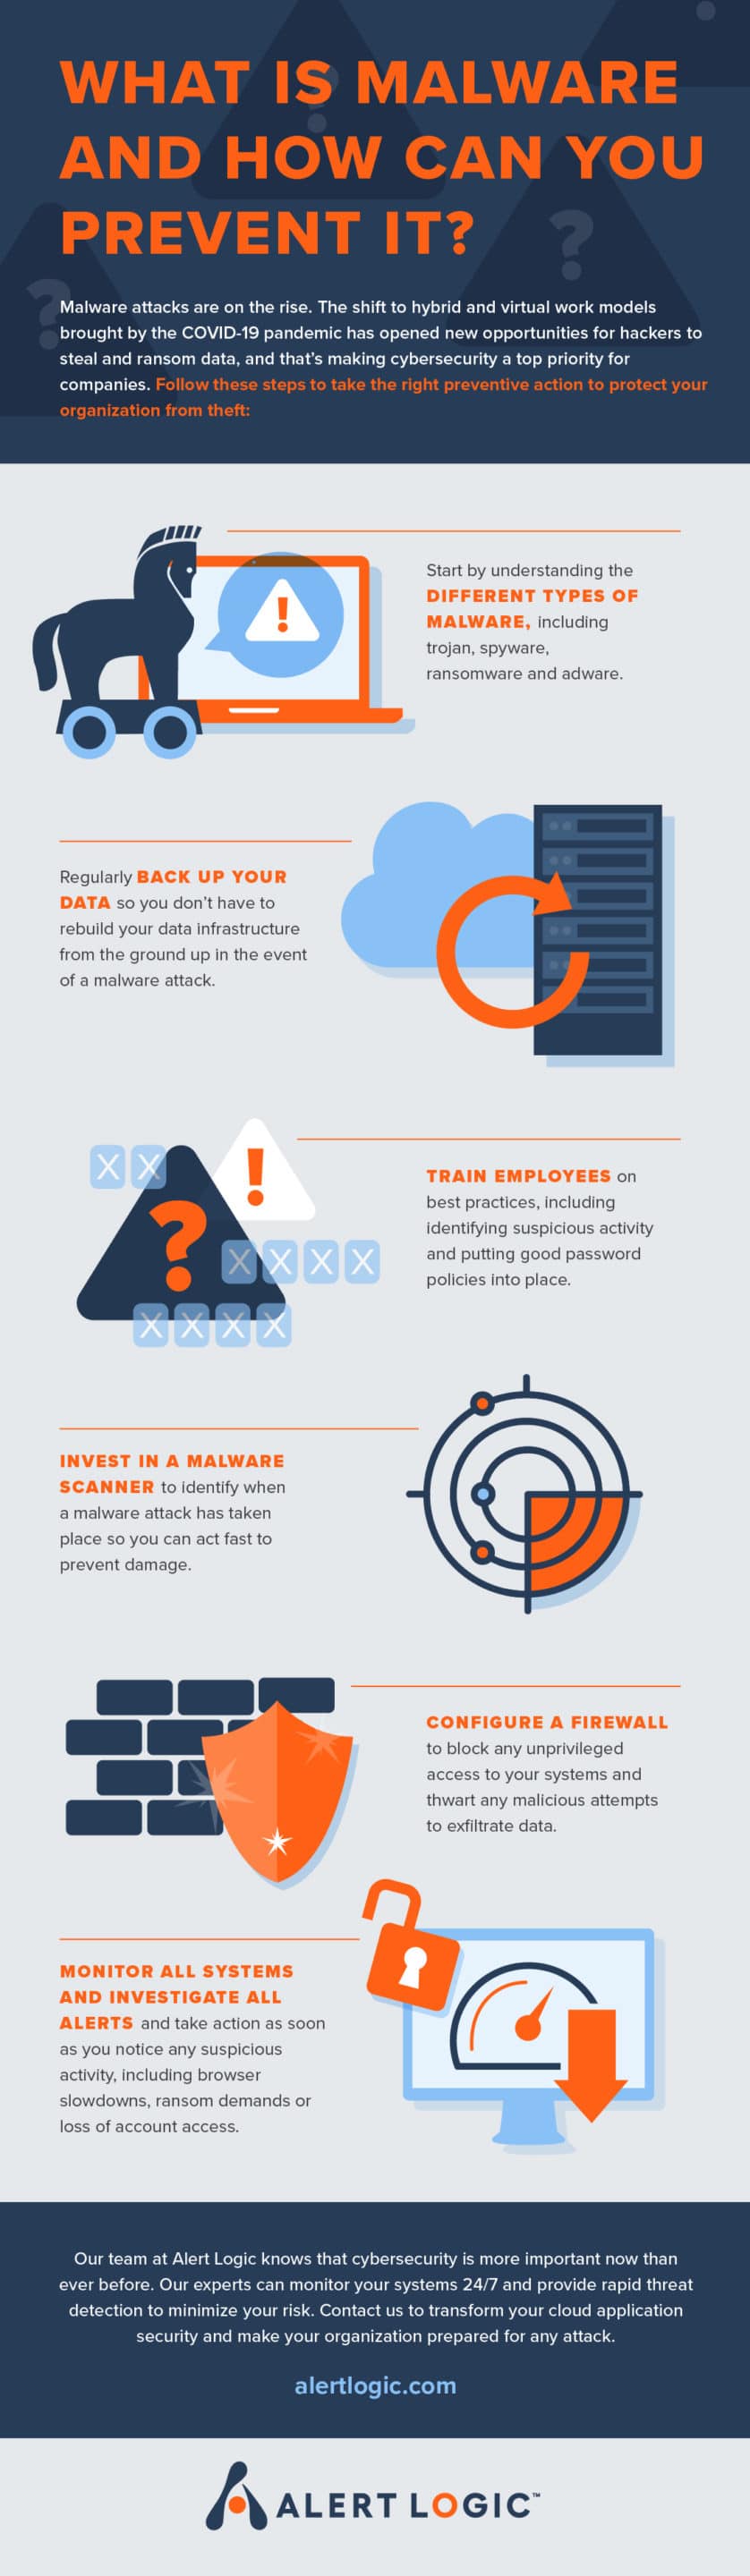 What Is Malware Infographic